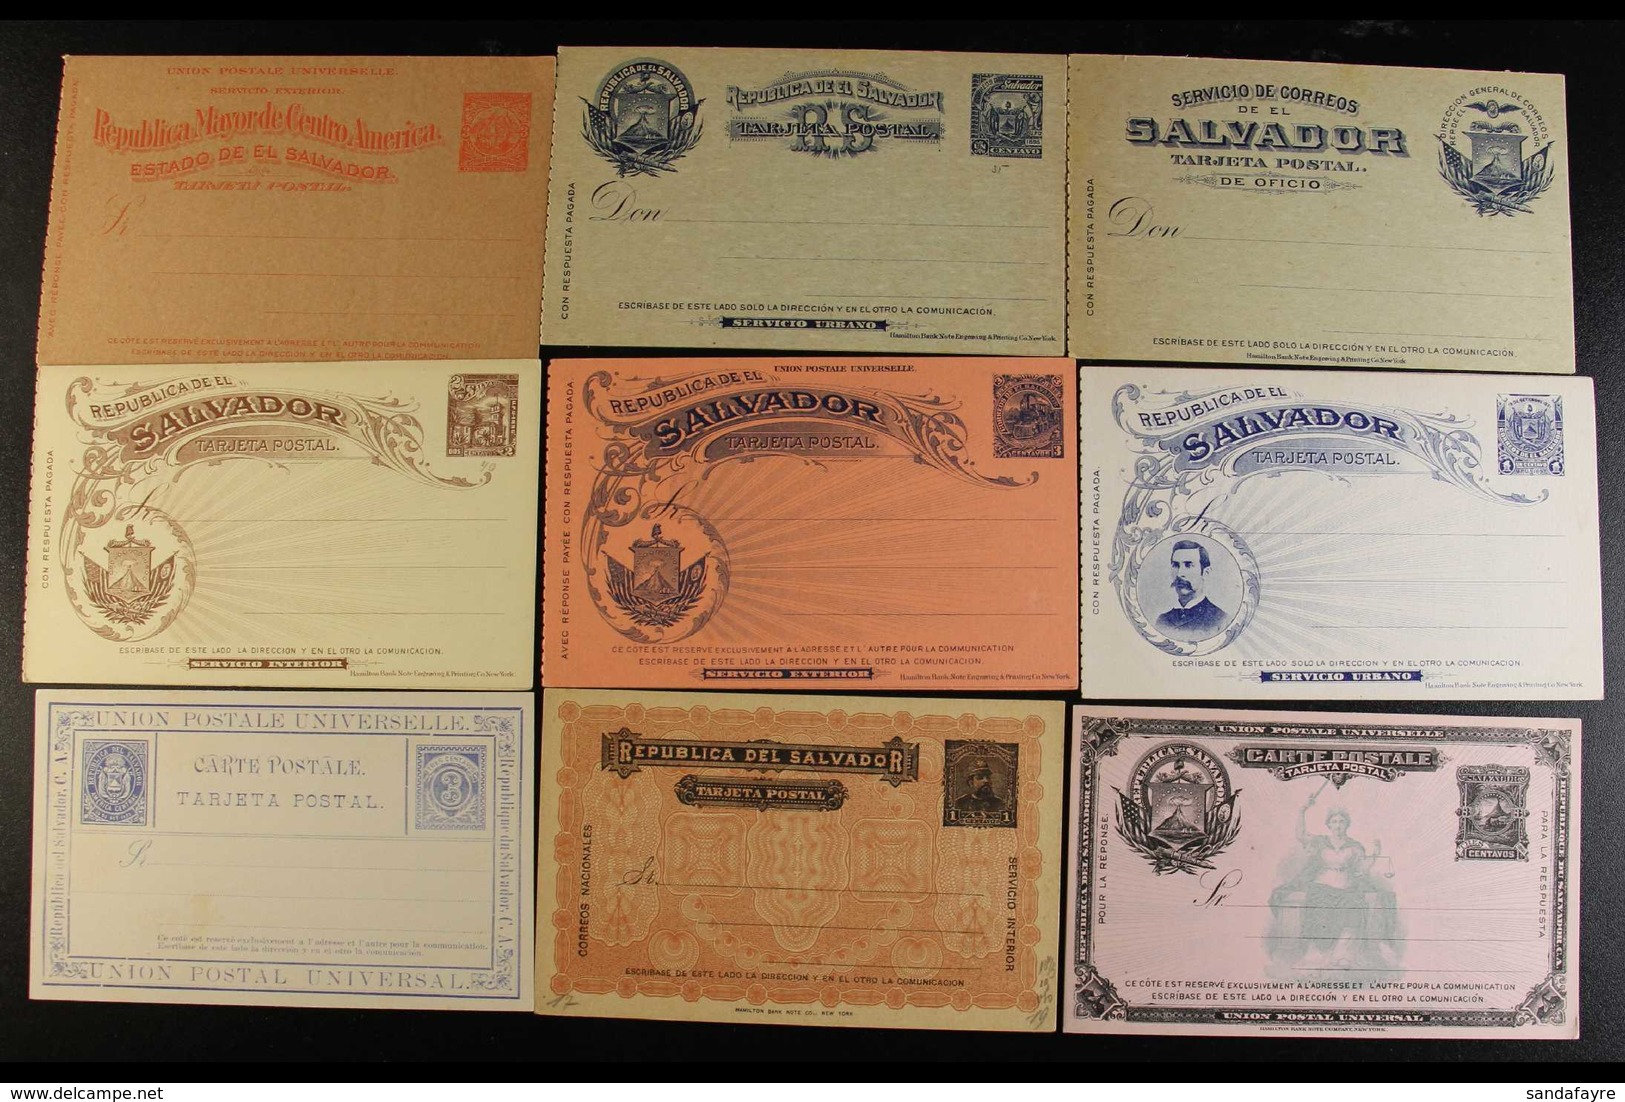 1882-1912 POSTAL STATIONERY Unused Range Of POSTCARDS & REPLY CARDS With A Strong Range Of Issued Types & Denominations, - Salvador